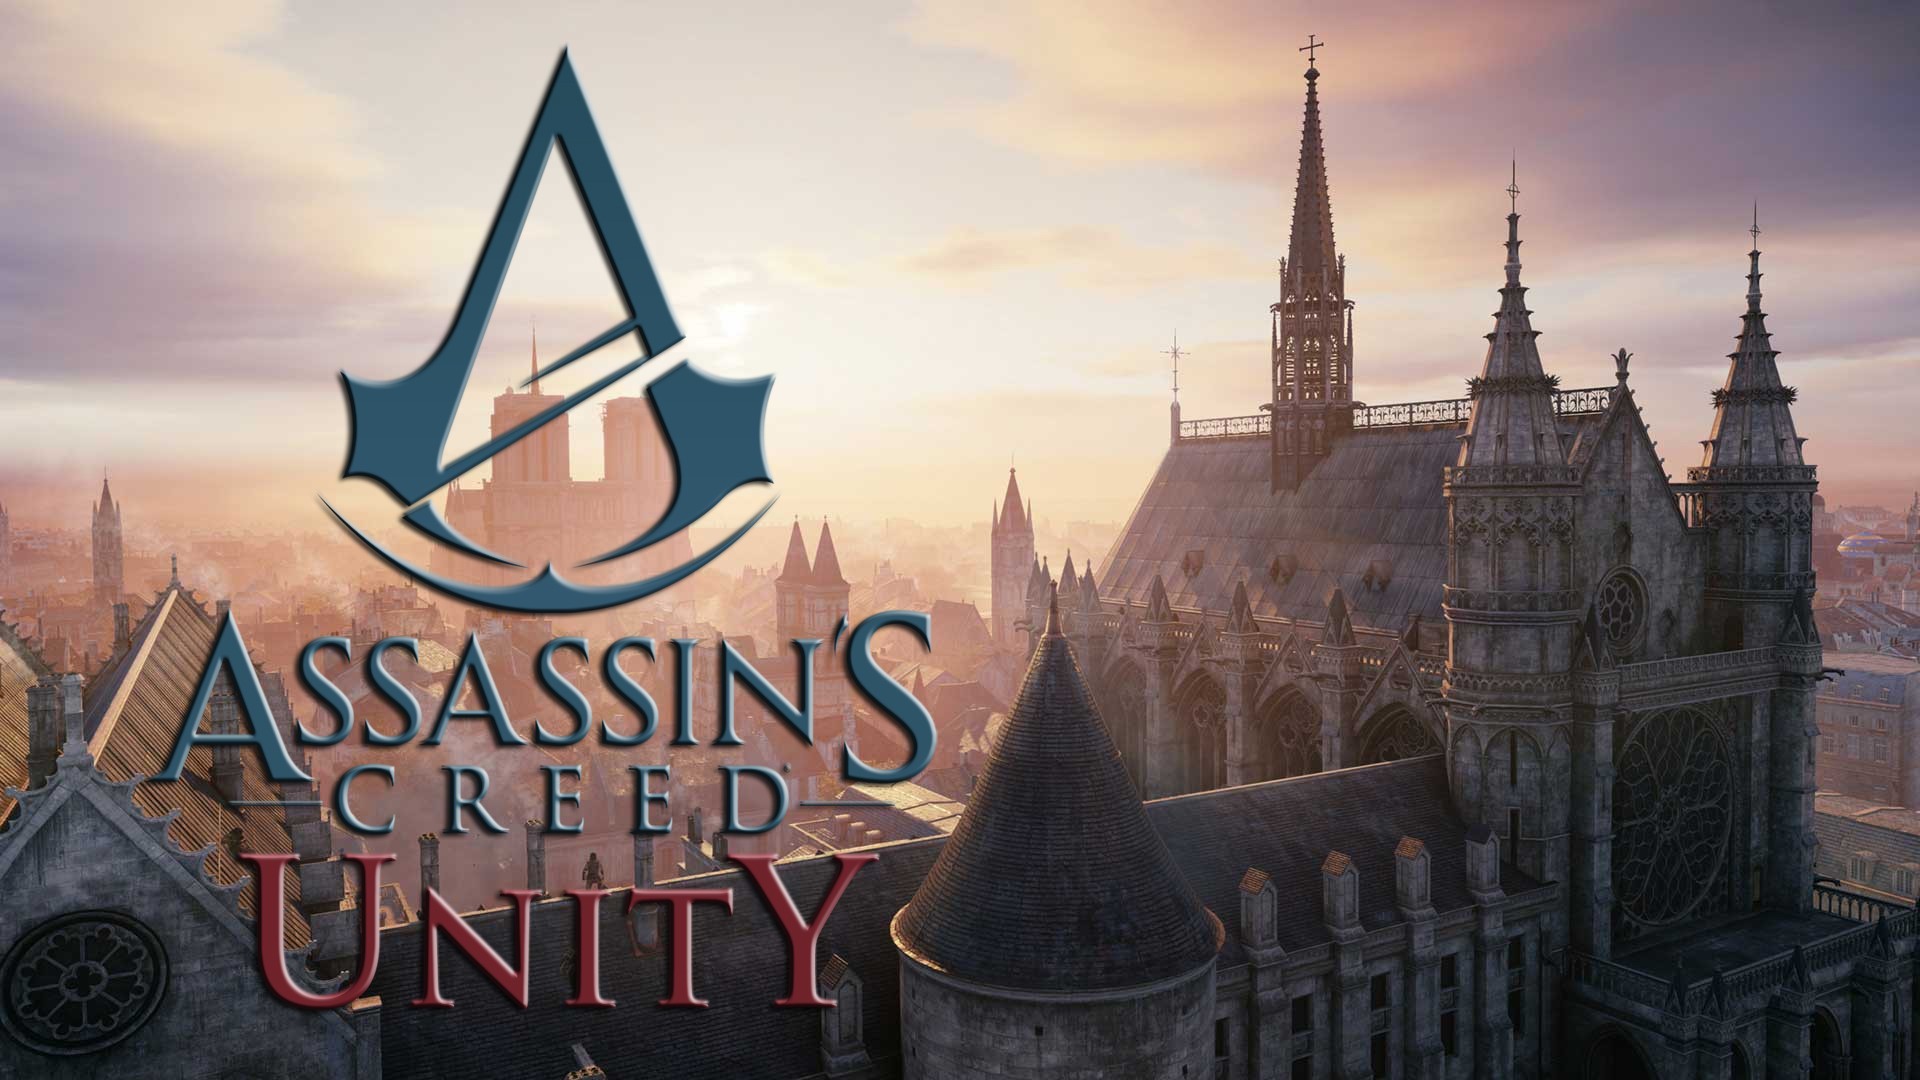 1920x1080 Assassins Creed Unity Wallpaper Background 8479